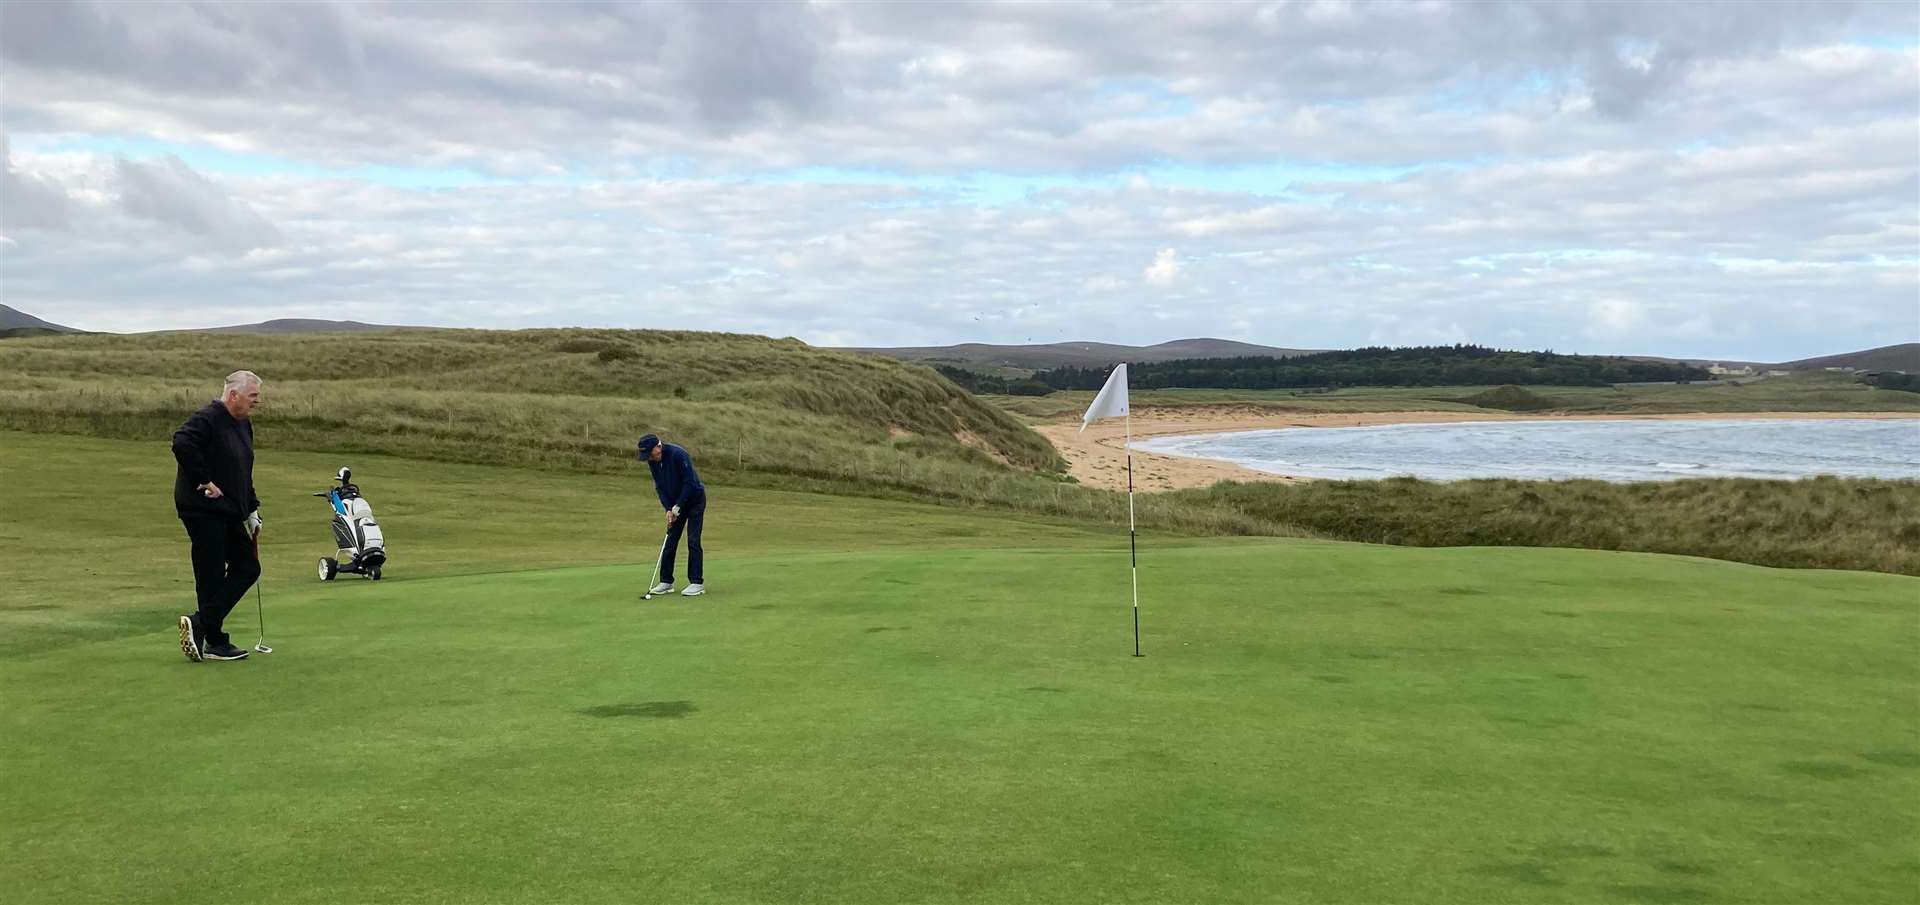 Fred Groves putting at the ninth hole in the North Point Distillery Open as Alex Anderson looks on.